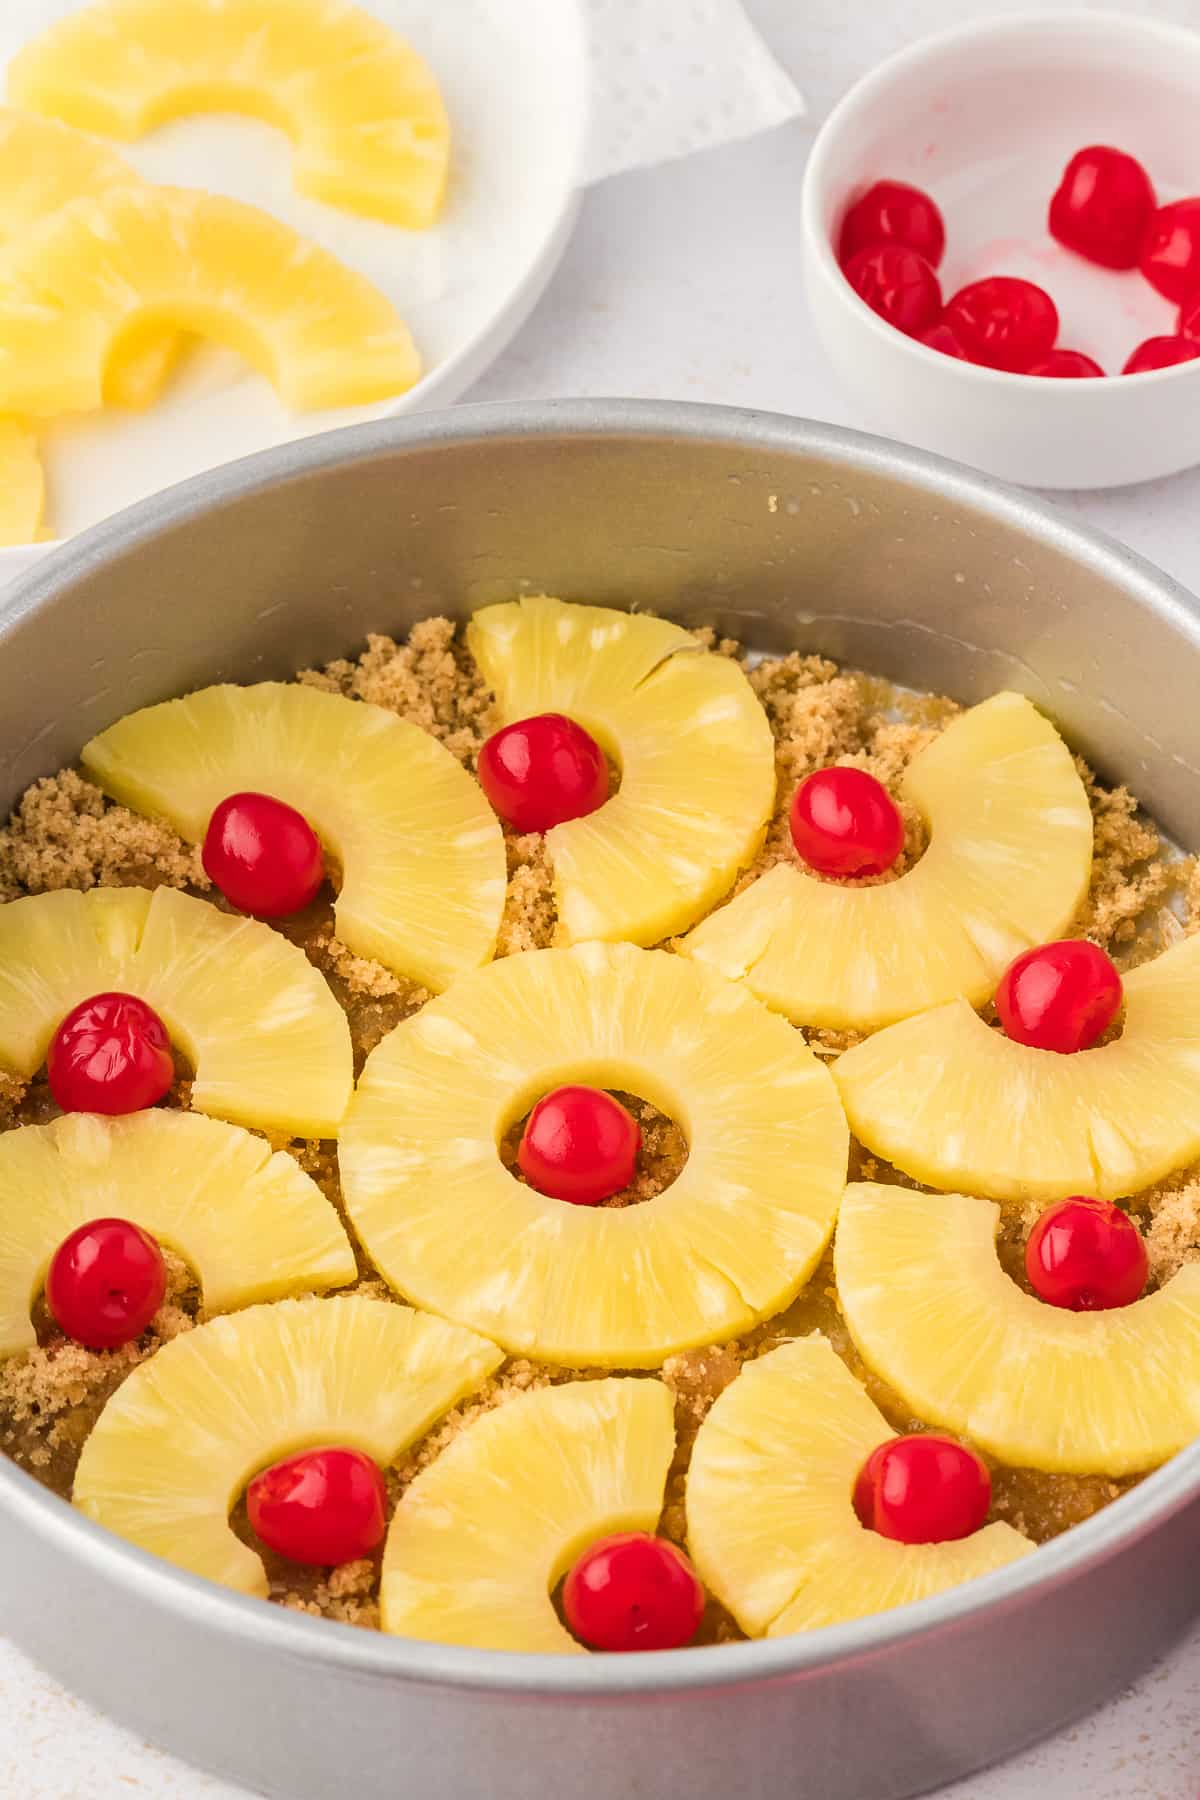 a cake pan with brown sugar and melted butter in the bottom and pineapple slices and maraschino cherries arranged in it, beside a red and white kitchen towel, a plate of sliced pineapple and a small bowl of cherries